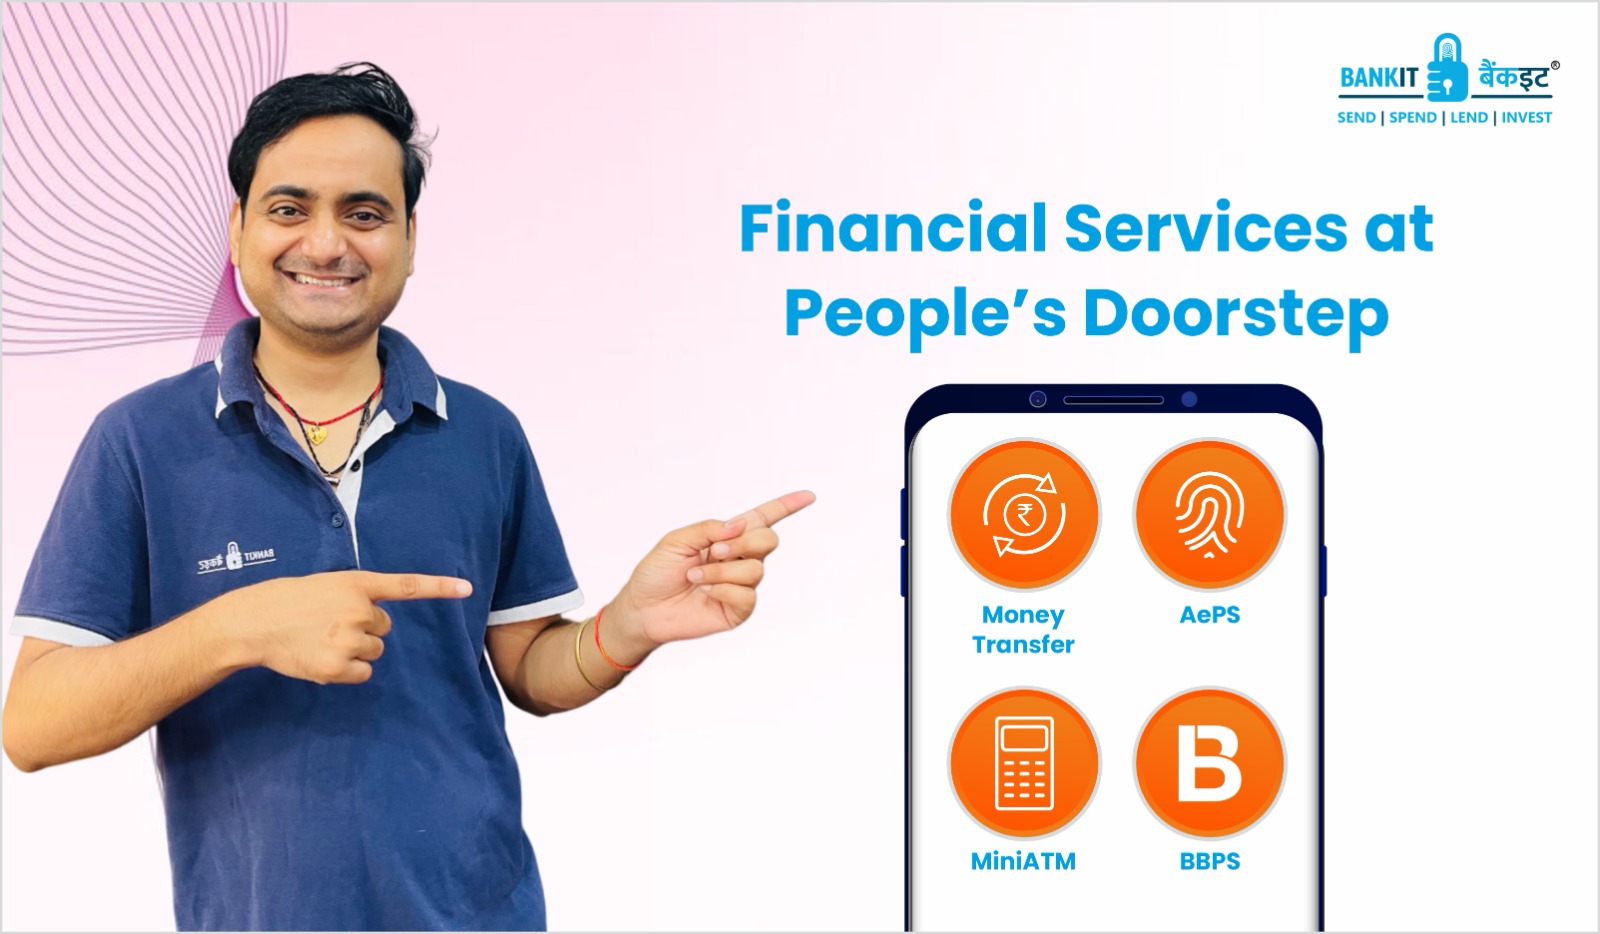 Financial Services at People’s Doorstep